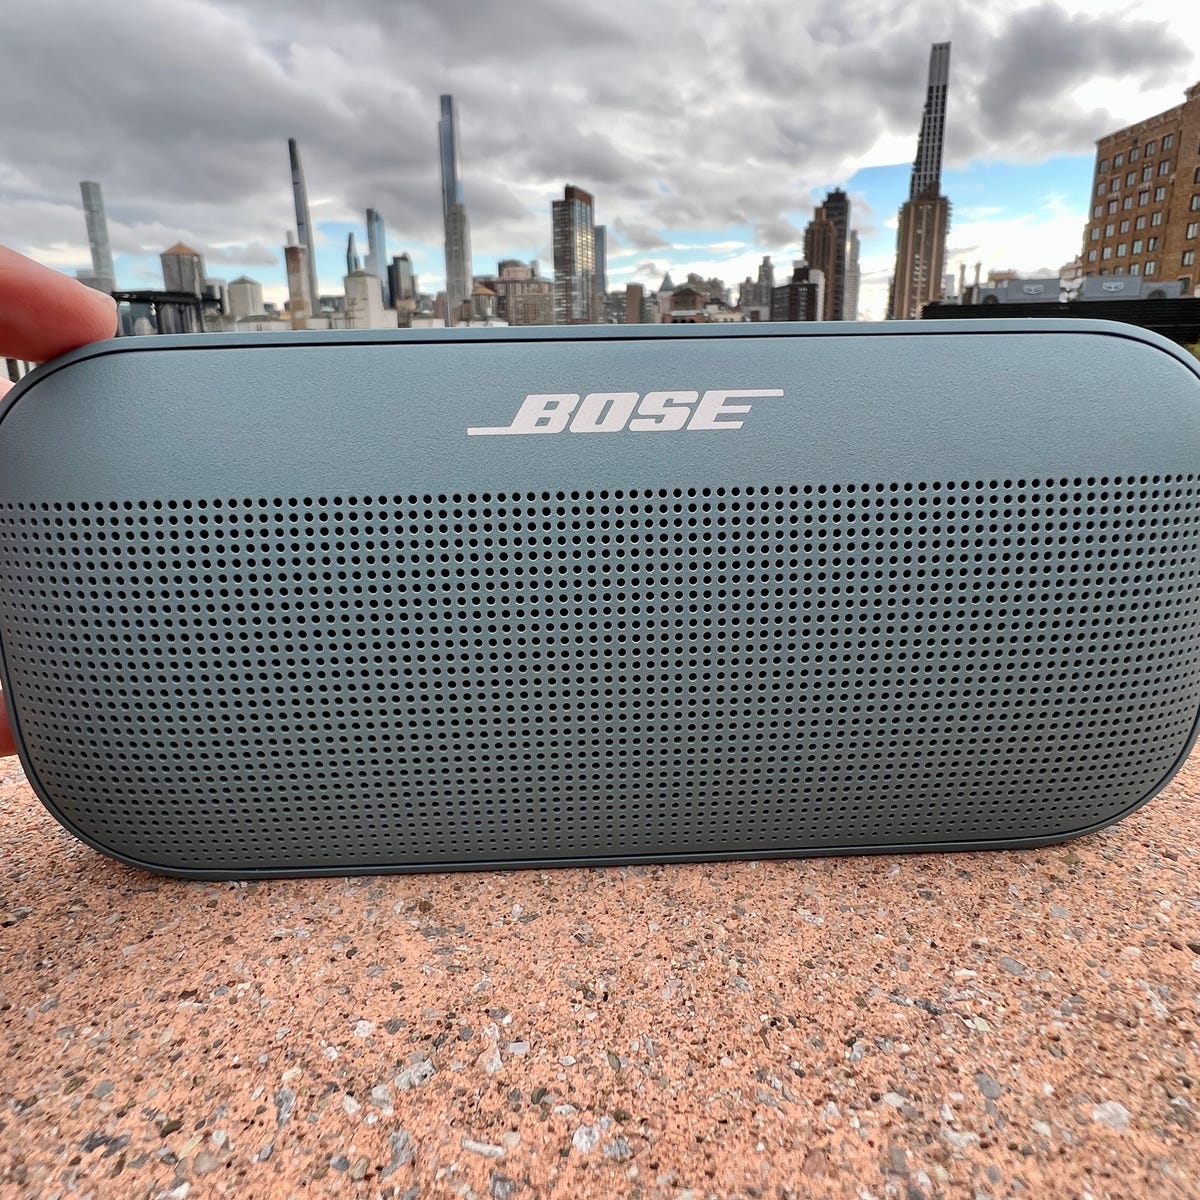 Bose SoundLink Flex review: mini Bluetooth speaker you can buy right now - CNET